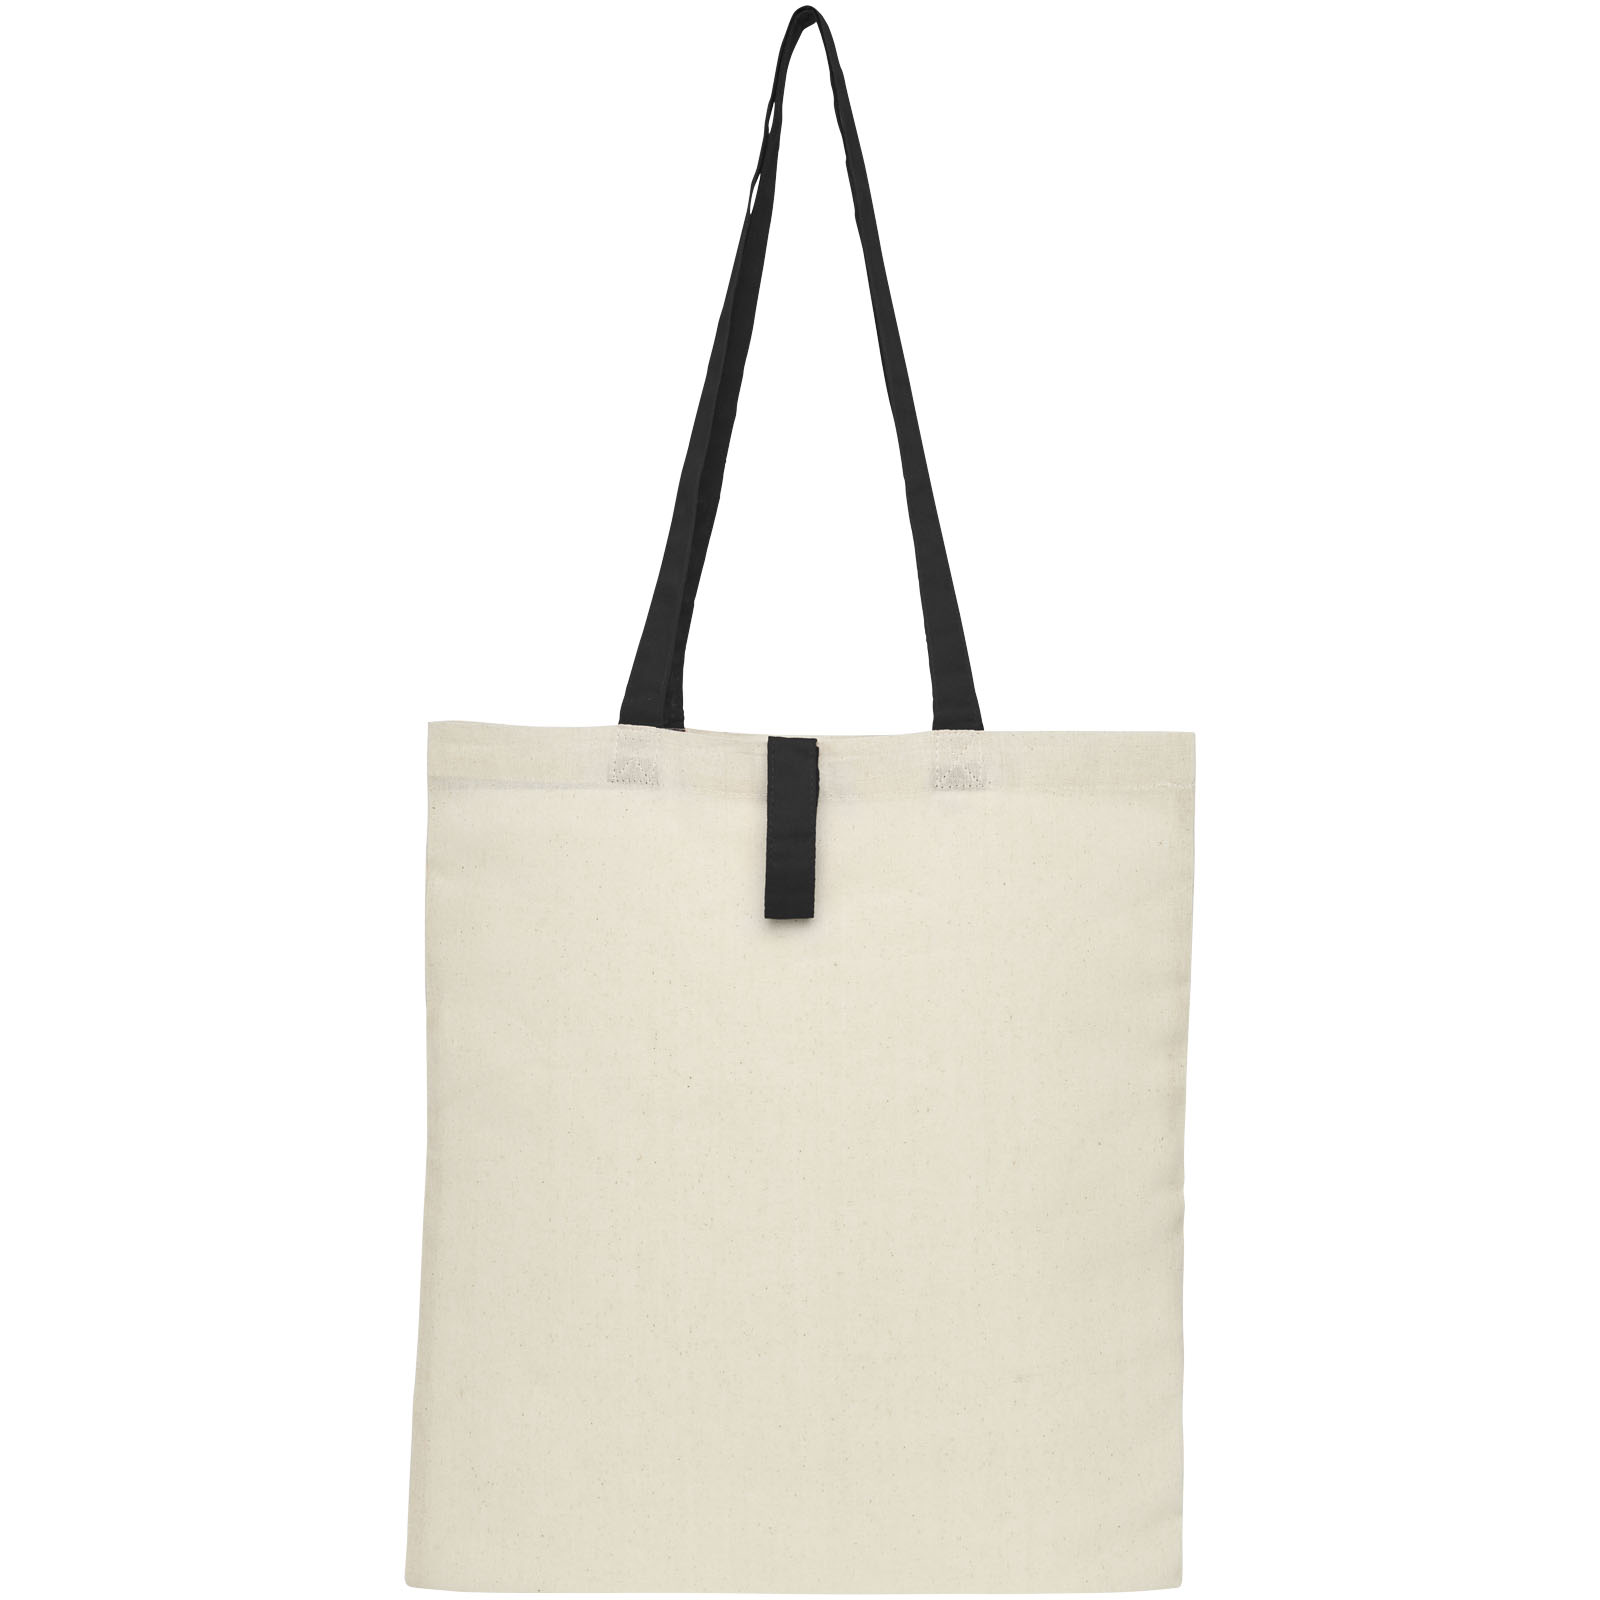 Advertising Shopping & Tote Bags - Nevada 100 g/m² cotton foldable tote bag 7L - 1